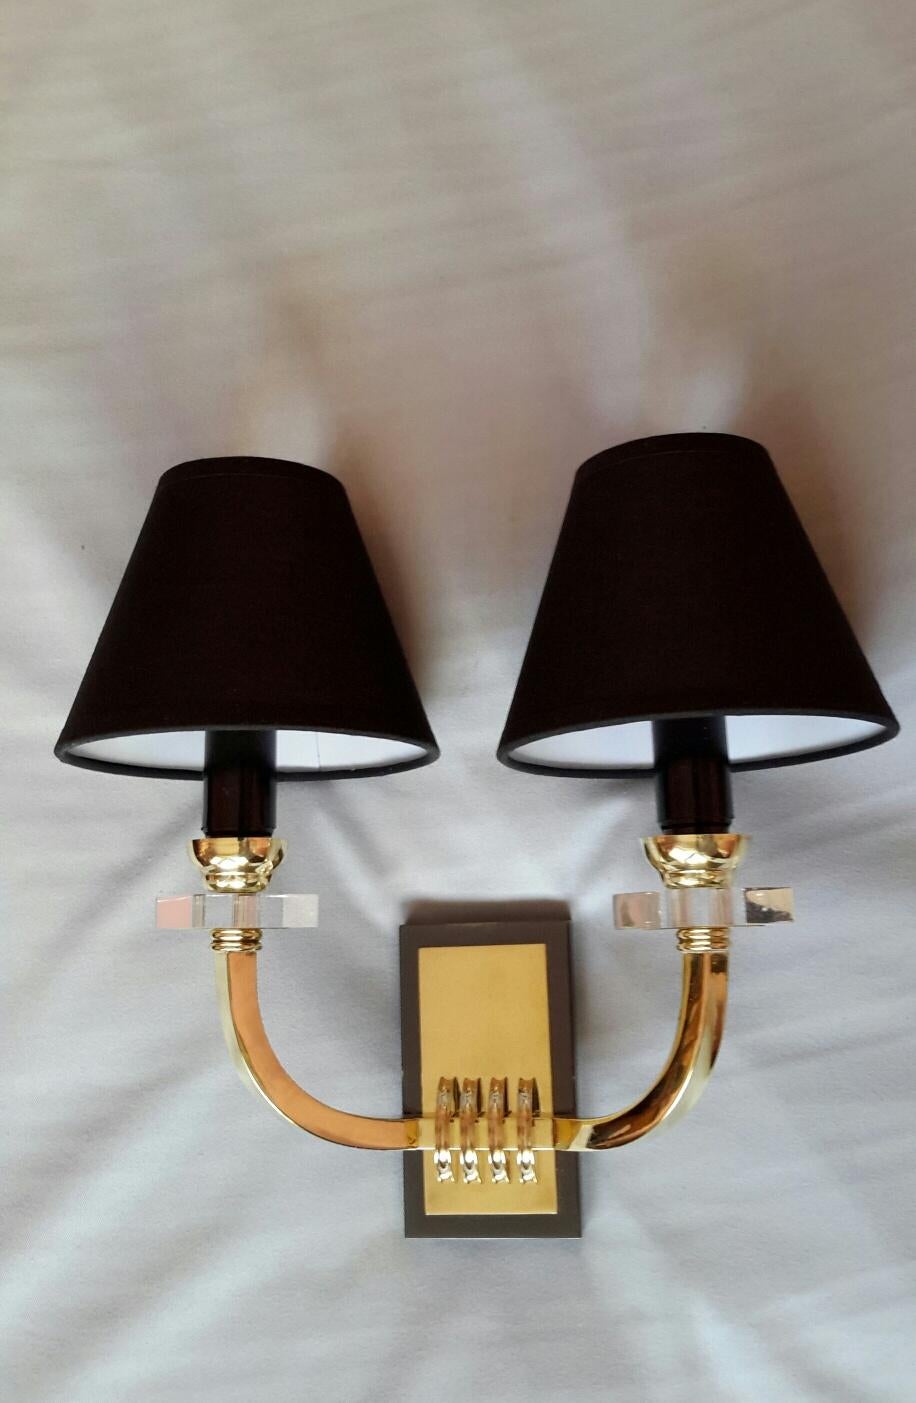 Jacques Adnet Bronze Neoclassical Sconces, France, 1950 For Sale 5